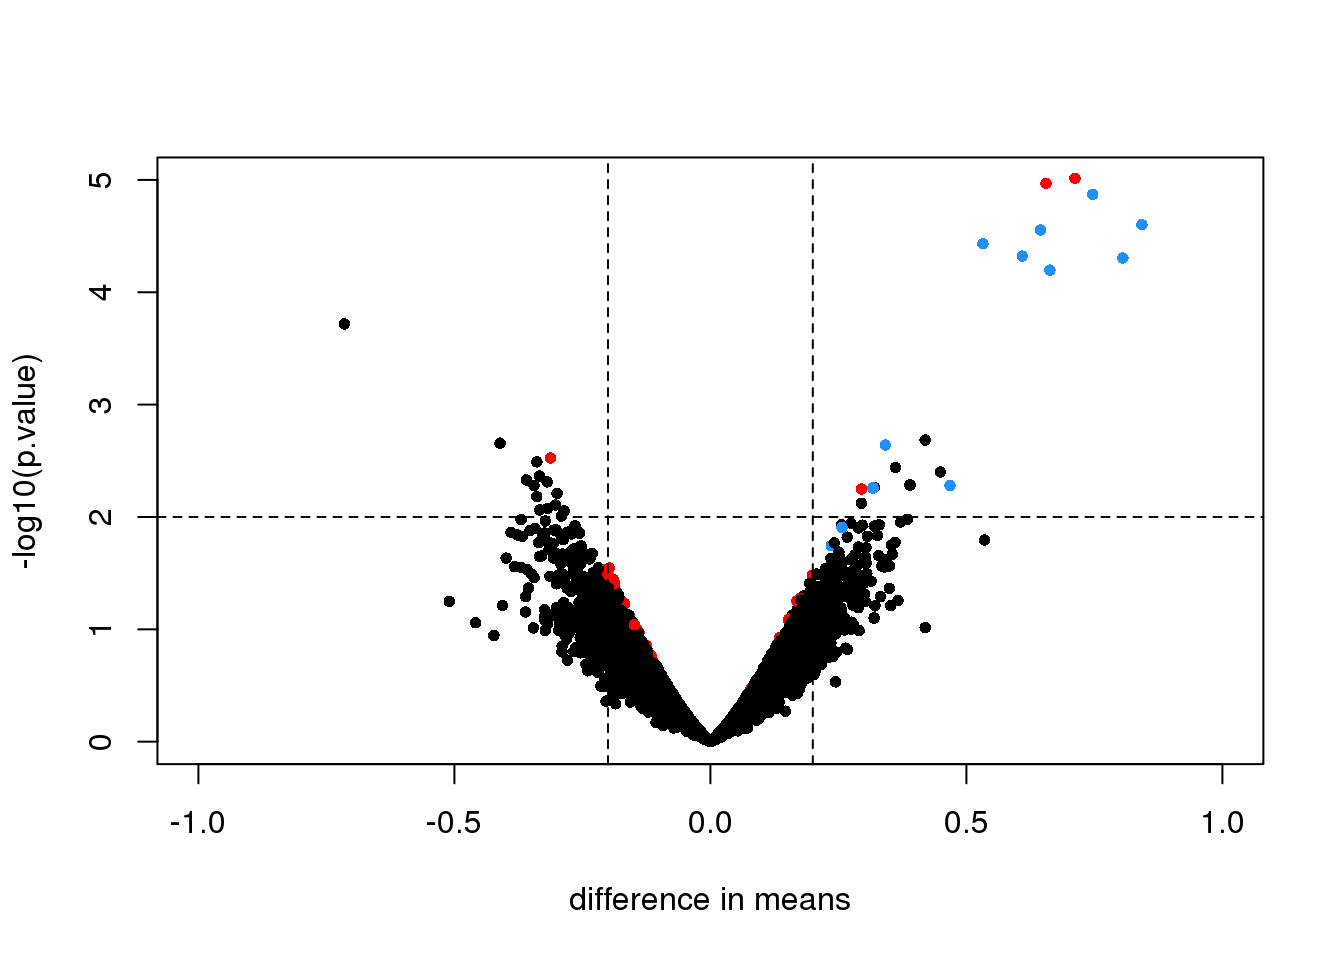 Volcano plot for moderated t-test comparing two groups. Spiked-in genes are denoted with blue. Among the rest of the genes, those with p-value < 0.01 are denoted with red.